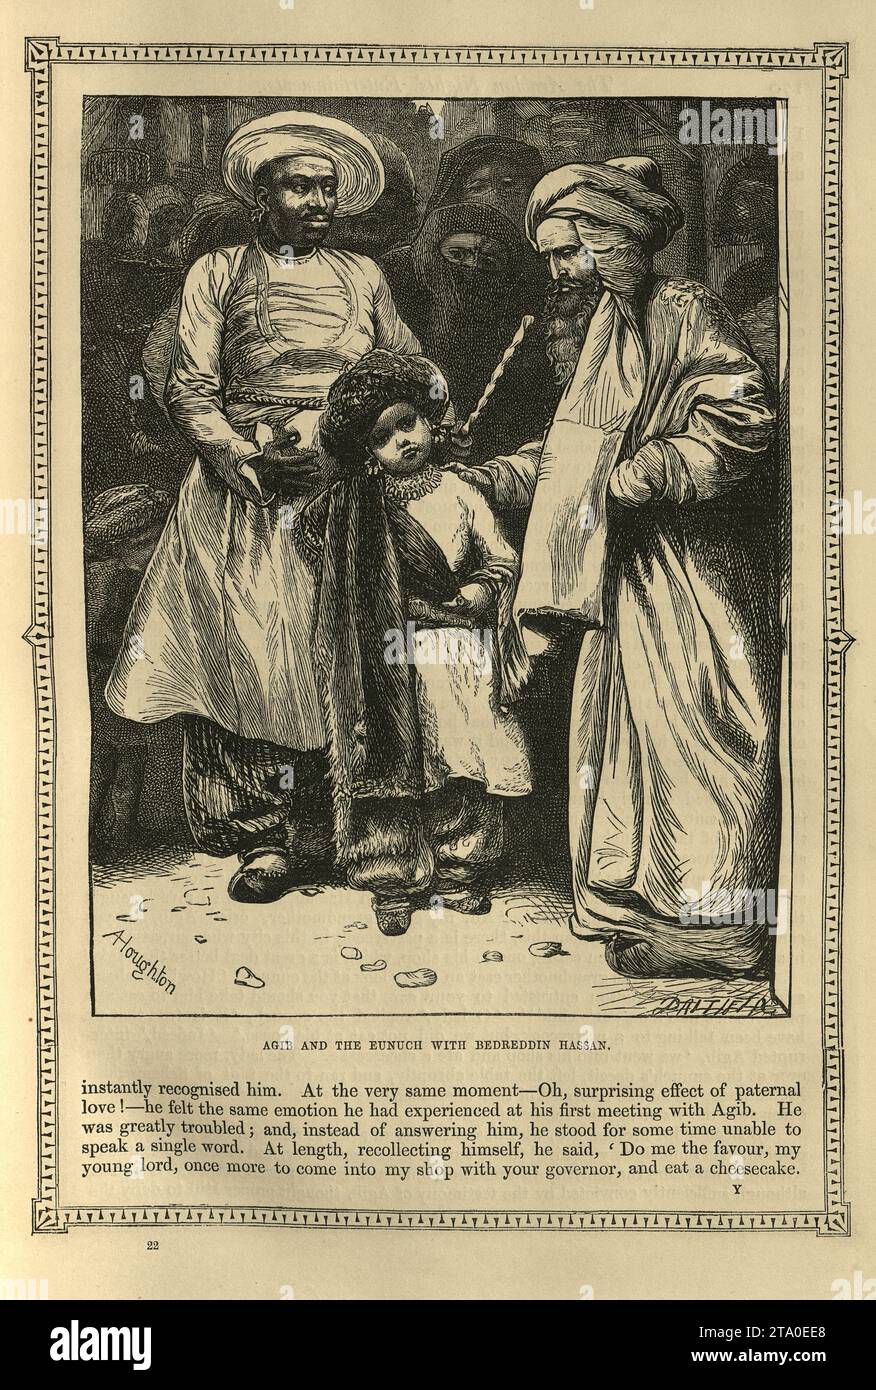 Vintage illustration One Thousand and One Nights, Agib and the eunuch with Bedreddin Hassan, Arabian, Middle Eastern folktales, by The Brothers Dalziel. History of Noureddin Ali and Bedreddin Hassan Stock Photo